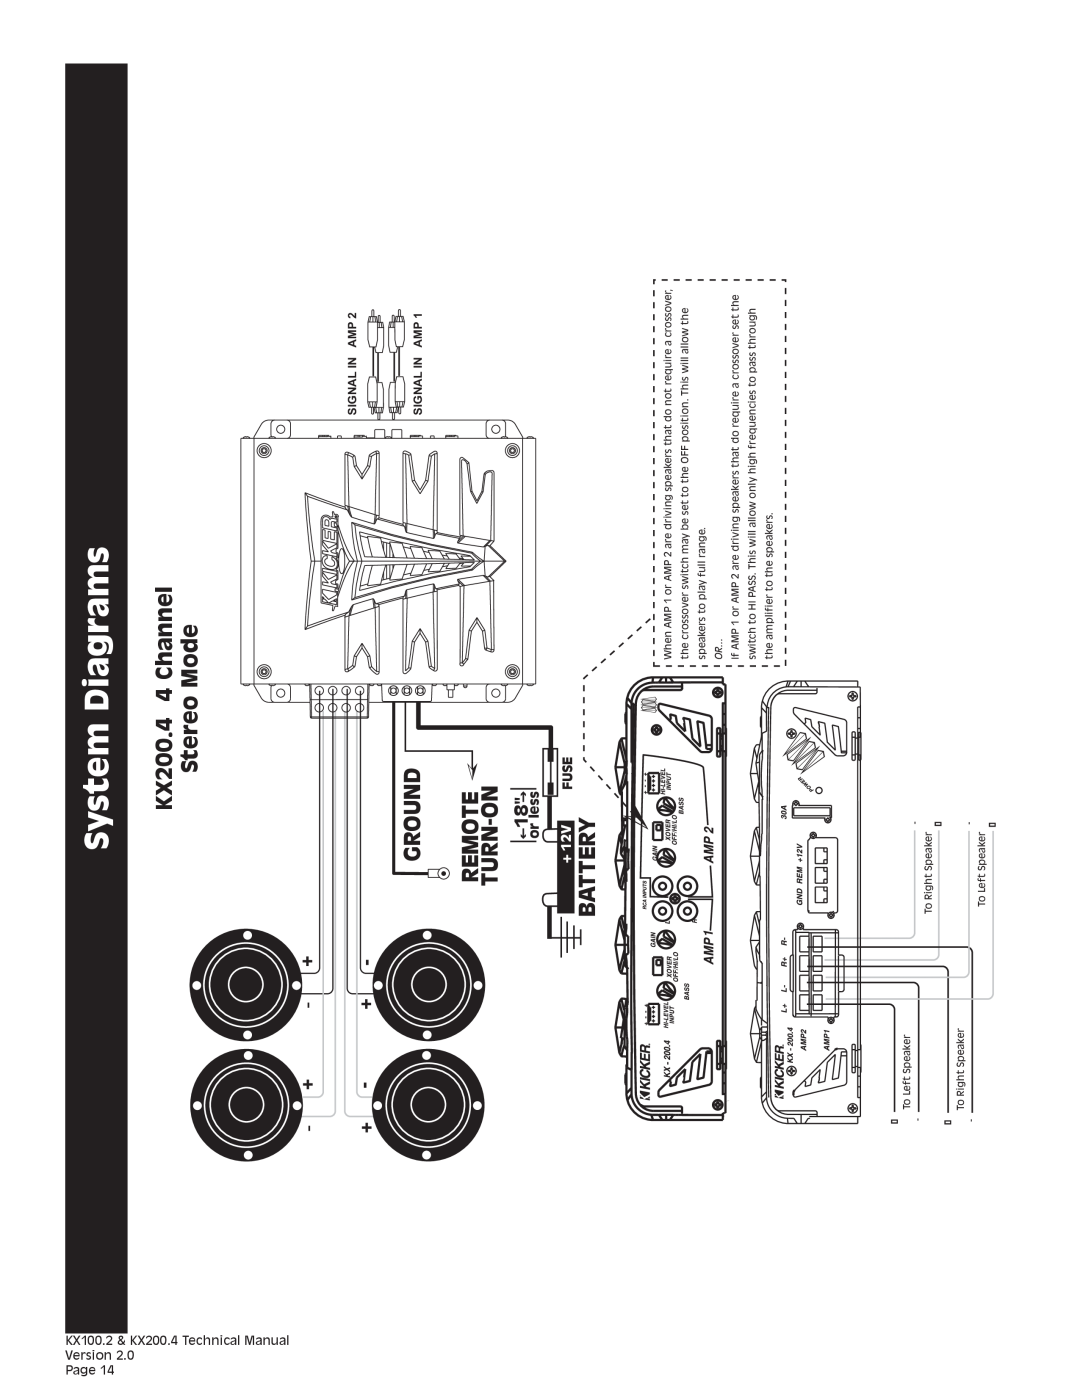 Kicker System Diagrams, KX200.4 4 Channel Stereo Mode, Ground Remote Turn-On, Battery, or less, +12V, Fuse 